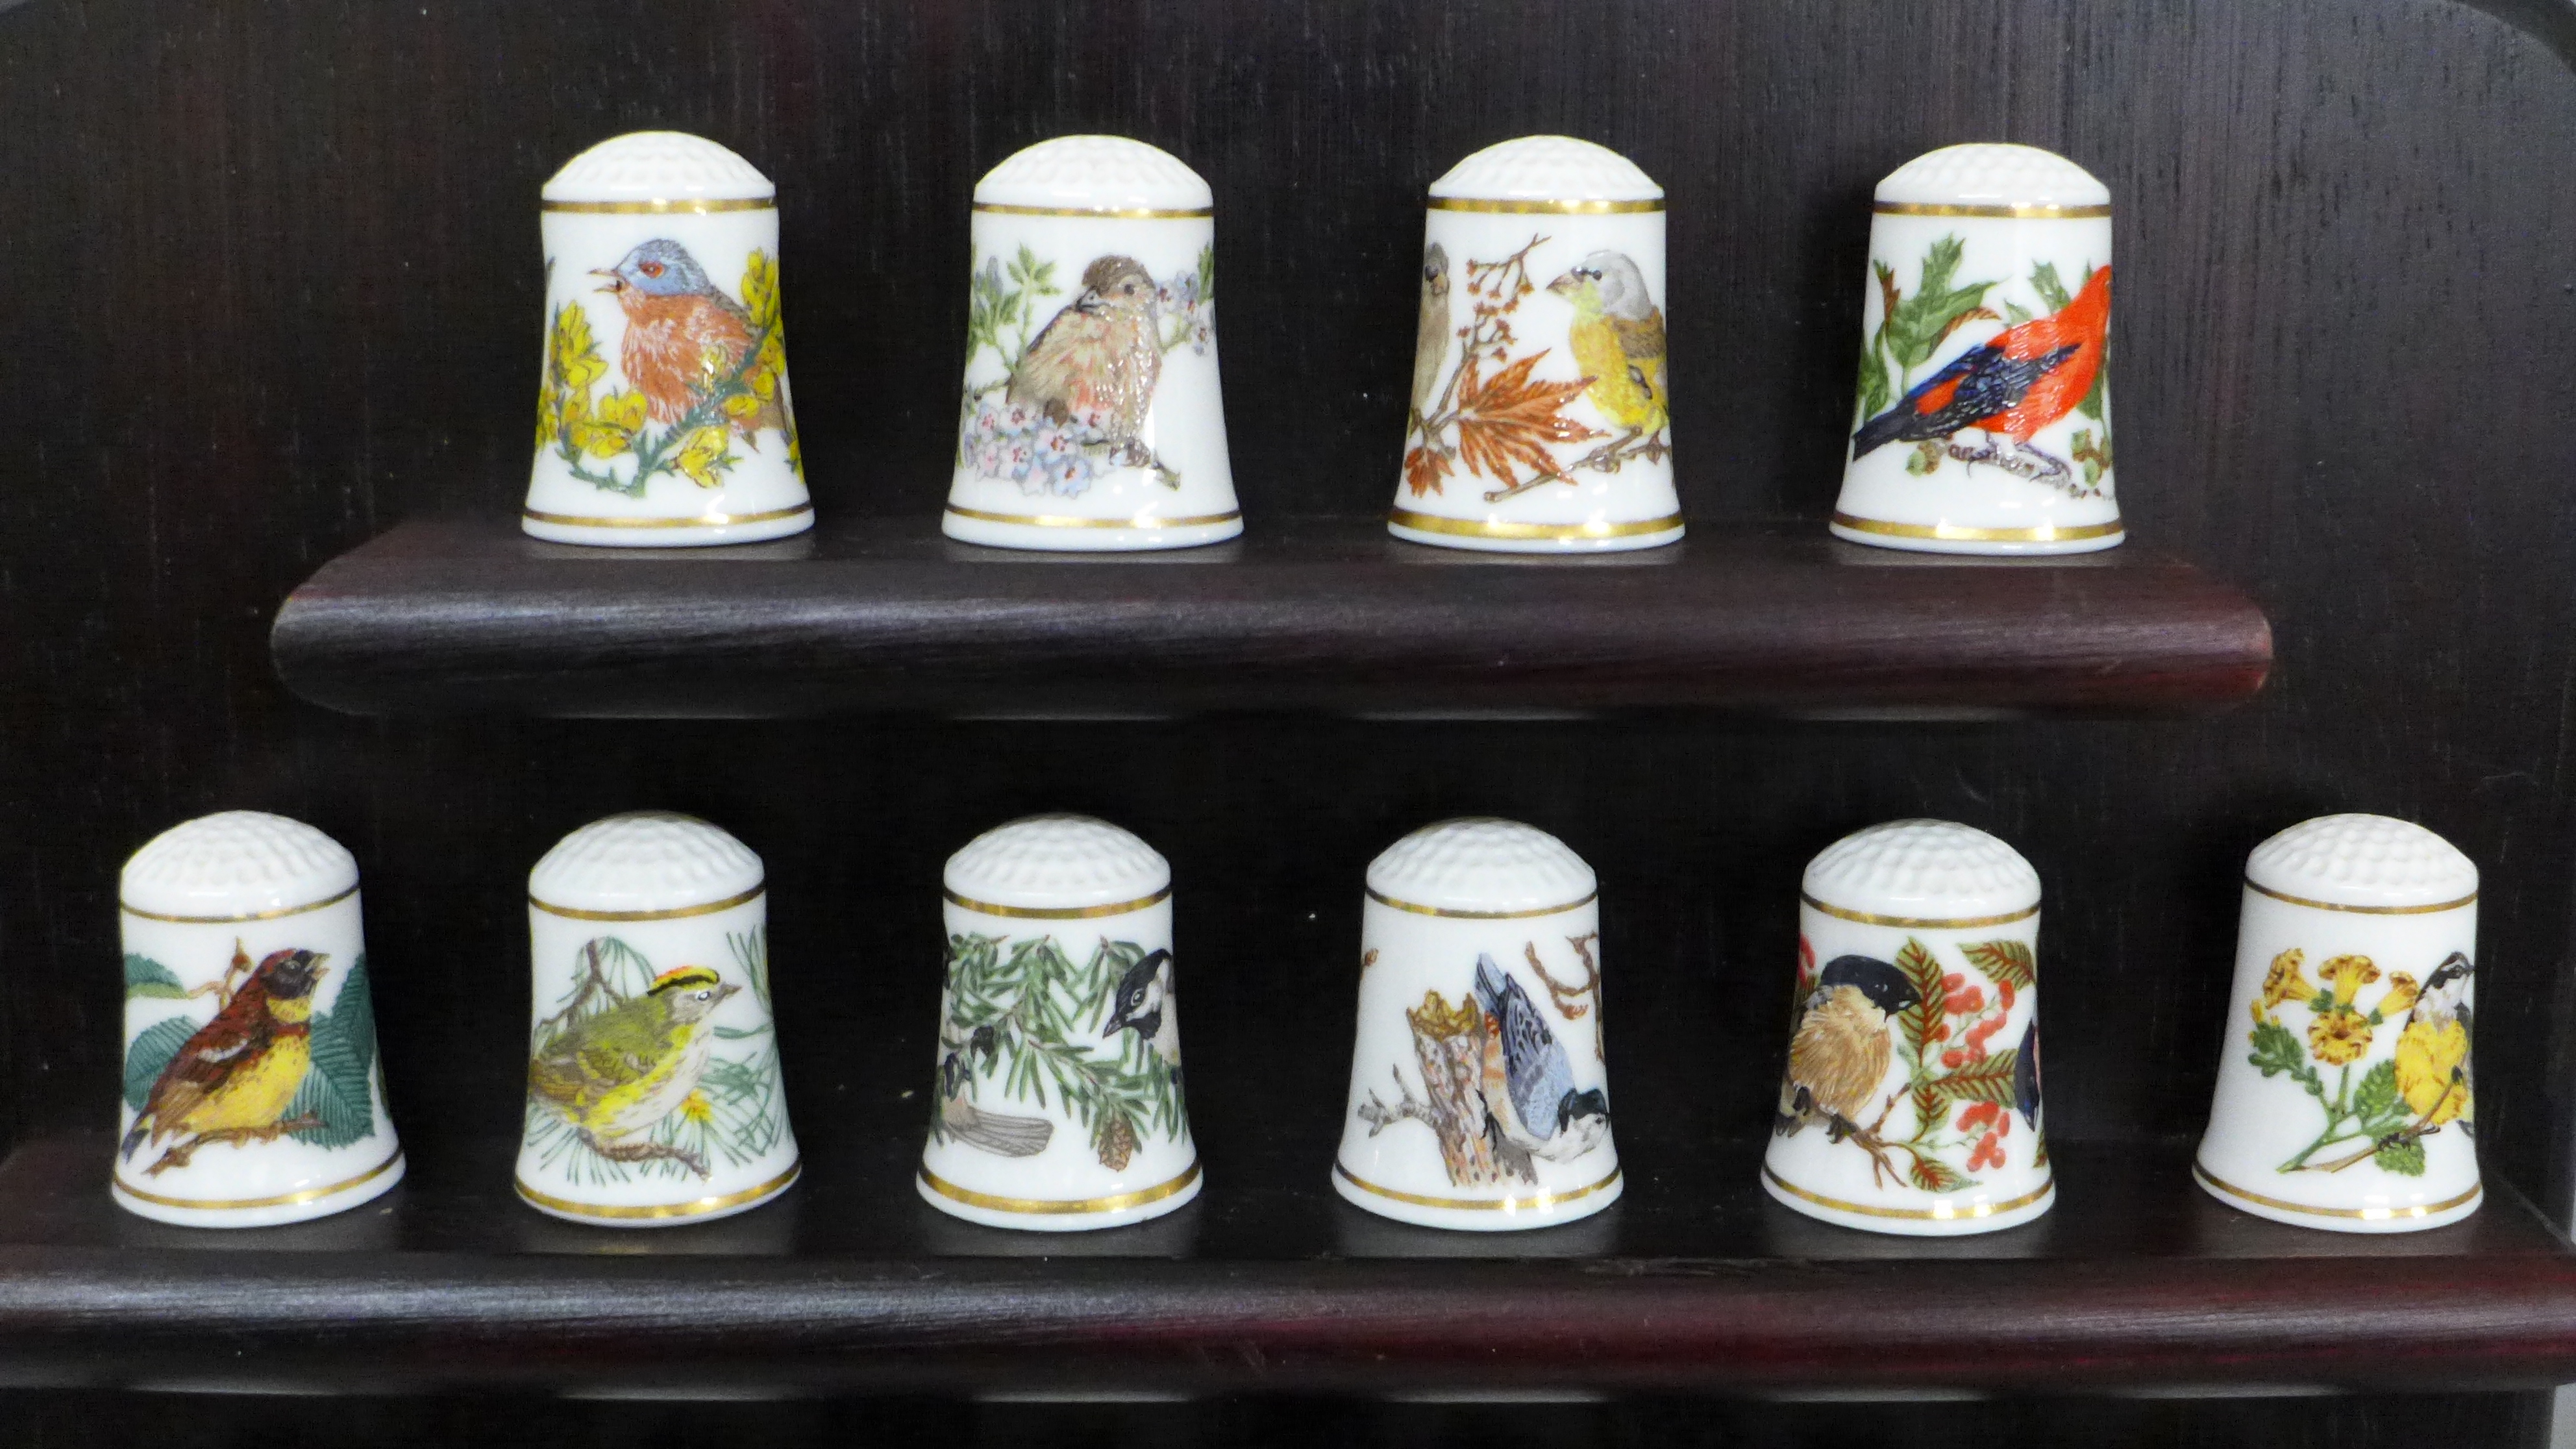 A Franklin Mint set of thimbles, Songbirds of the World, 22 thimbles on a wooden stand - Image 2 of 4